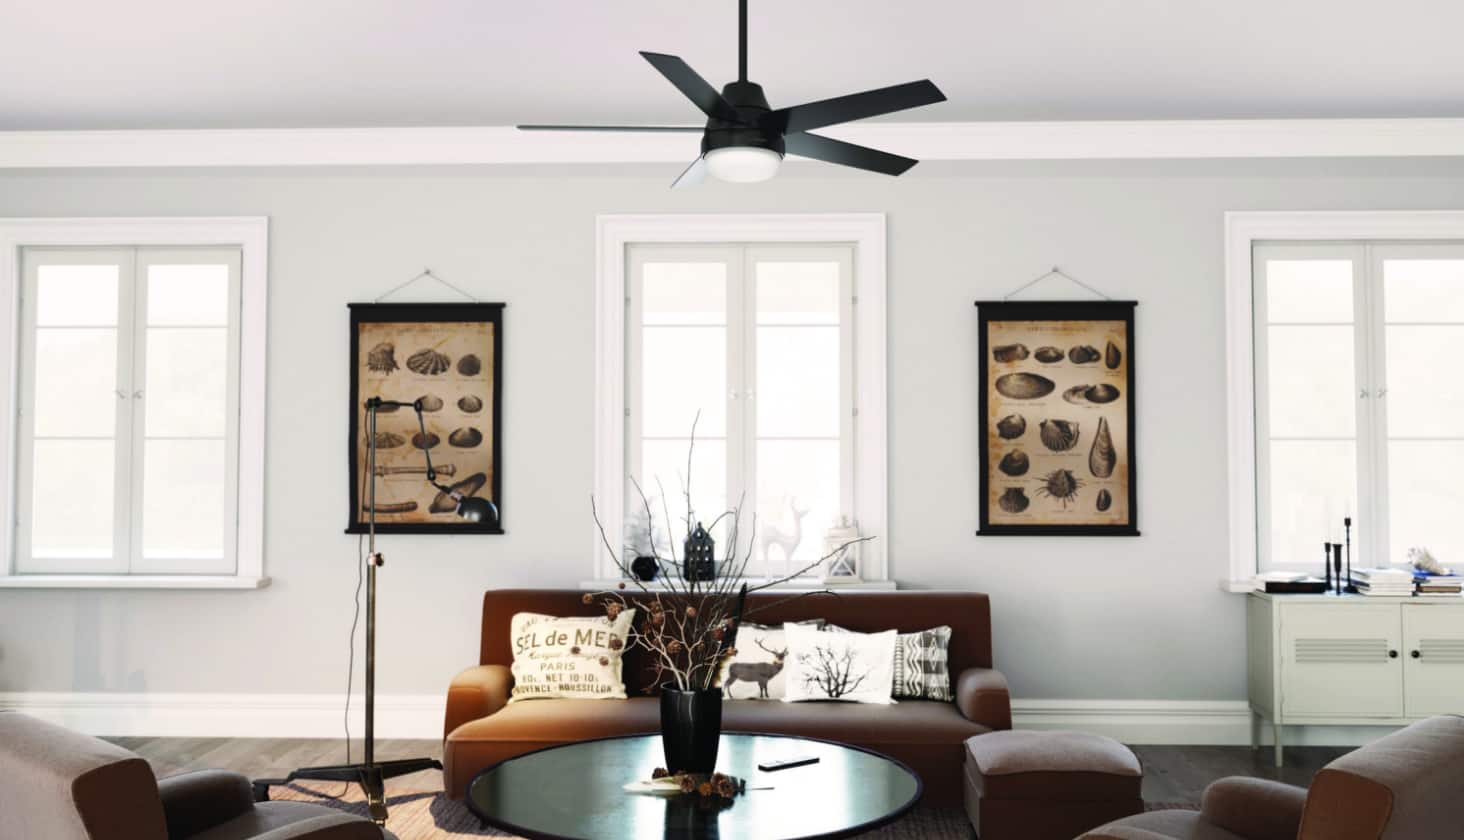 Spread warmth with ceiling fans